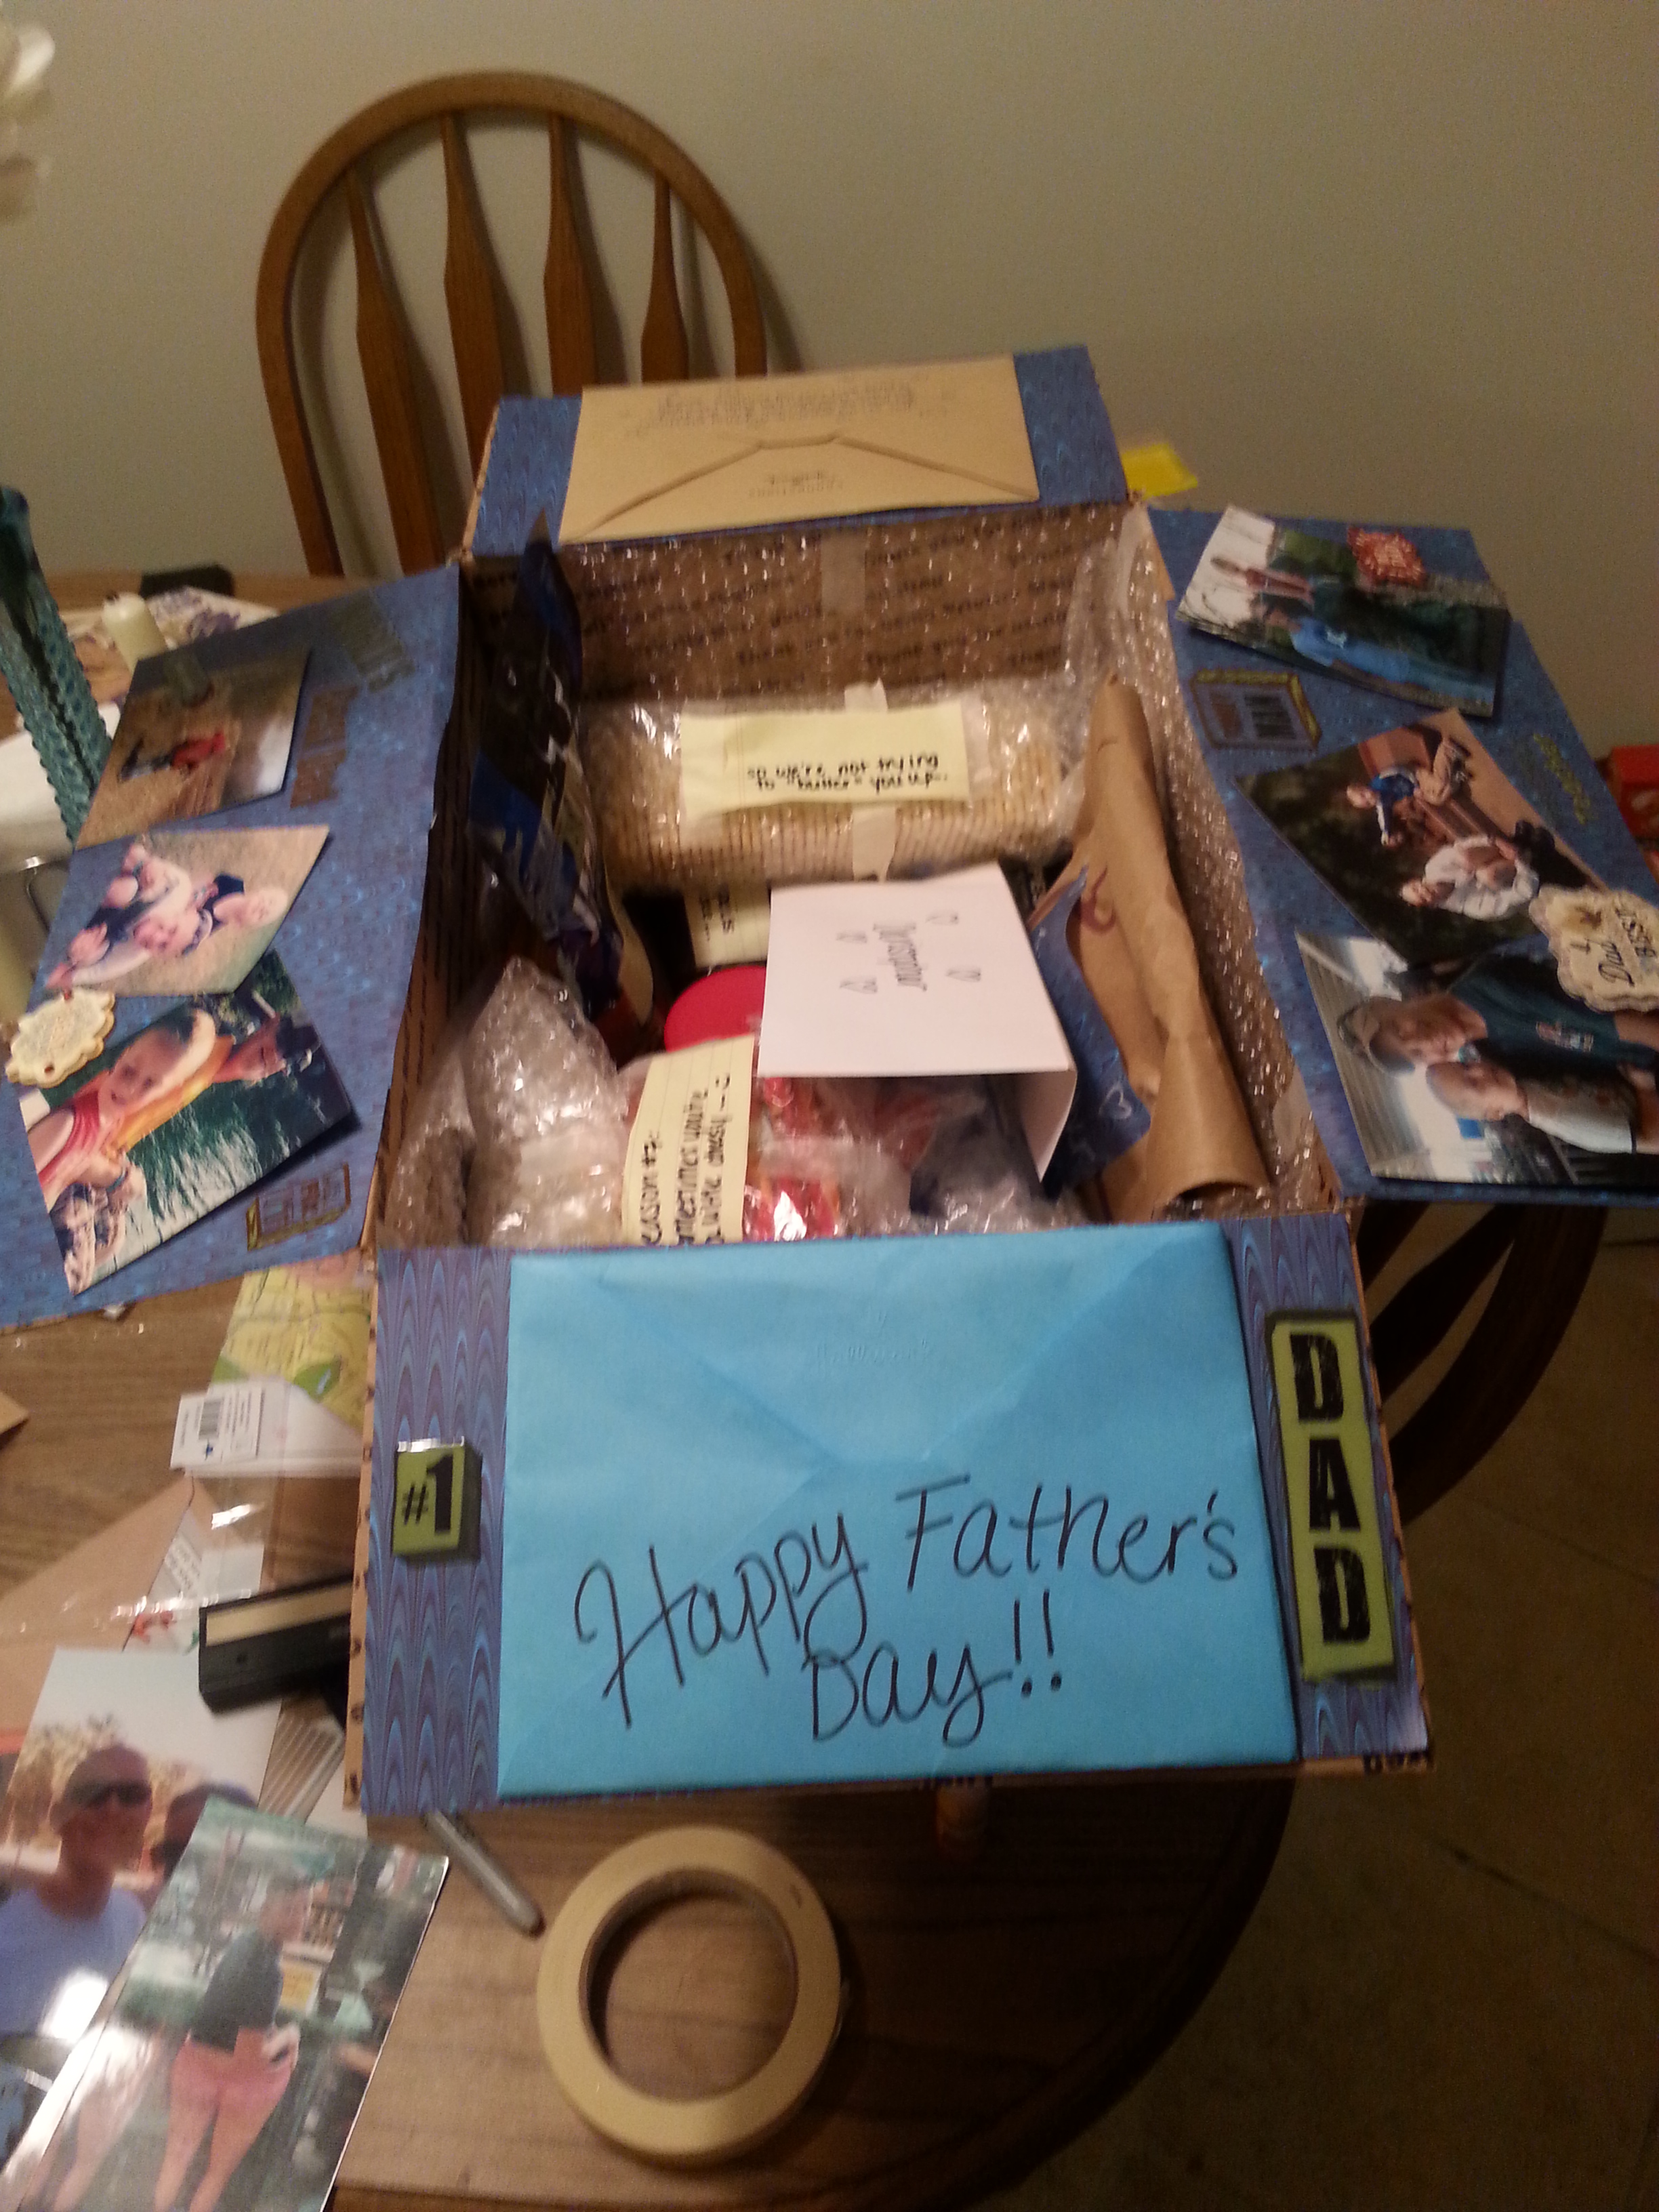 father's day care package